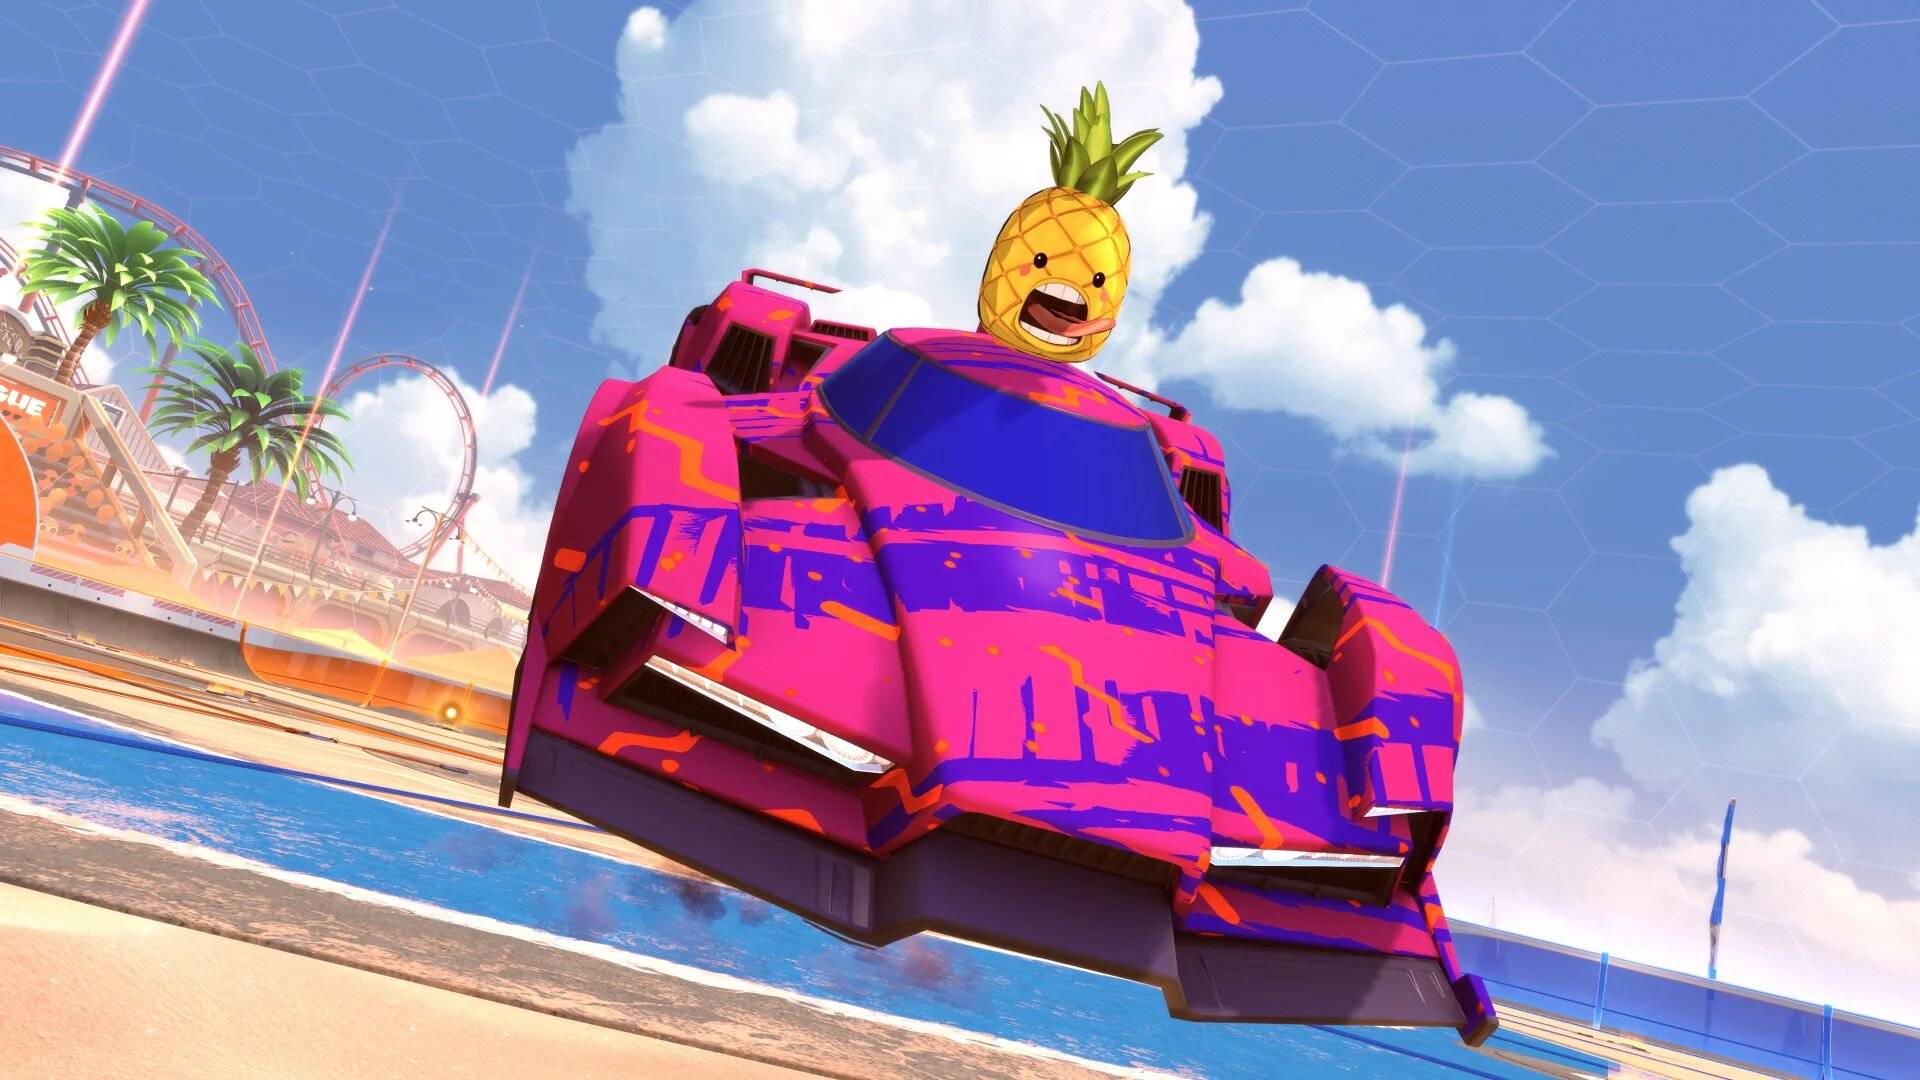 Rocket League car in air with pineapple on top